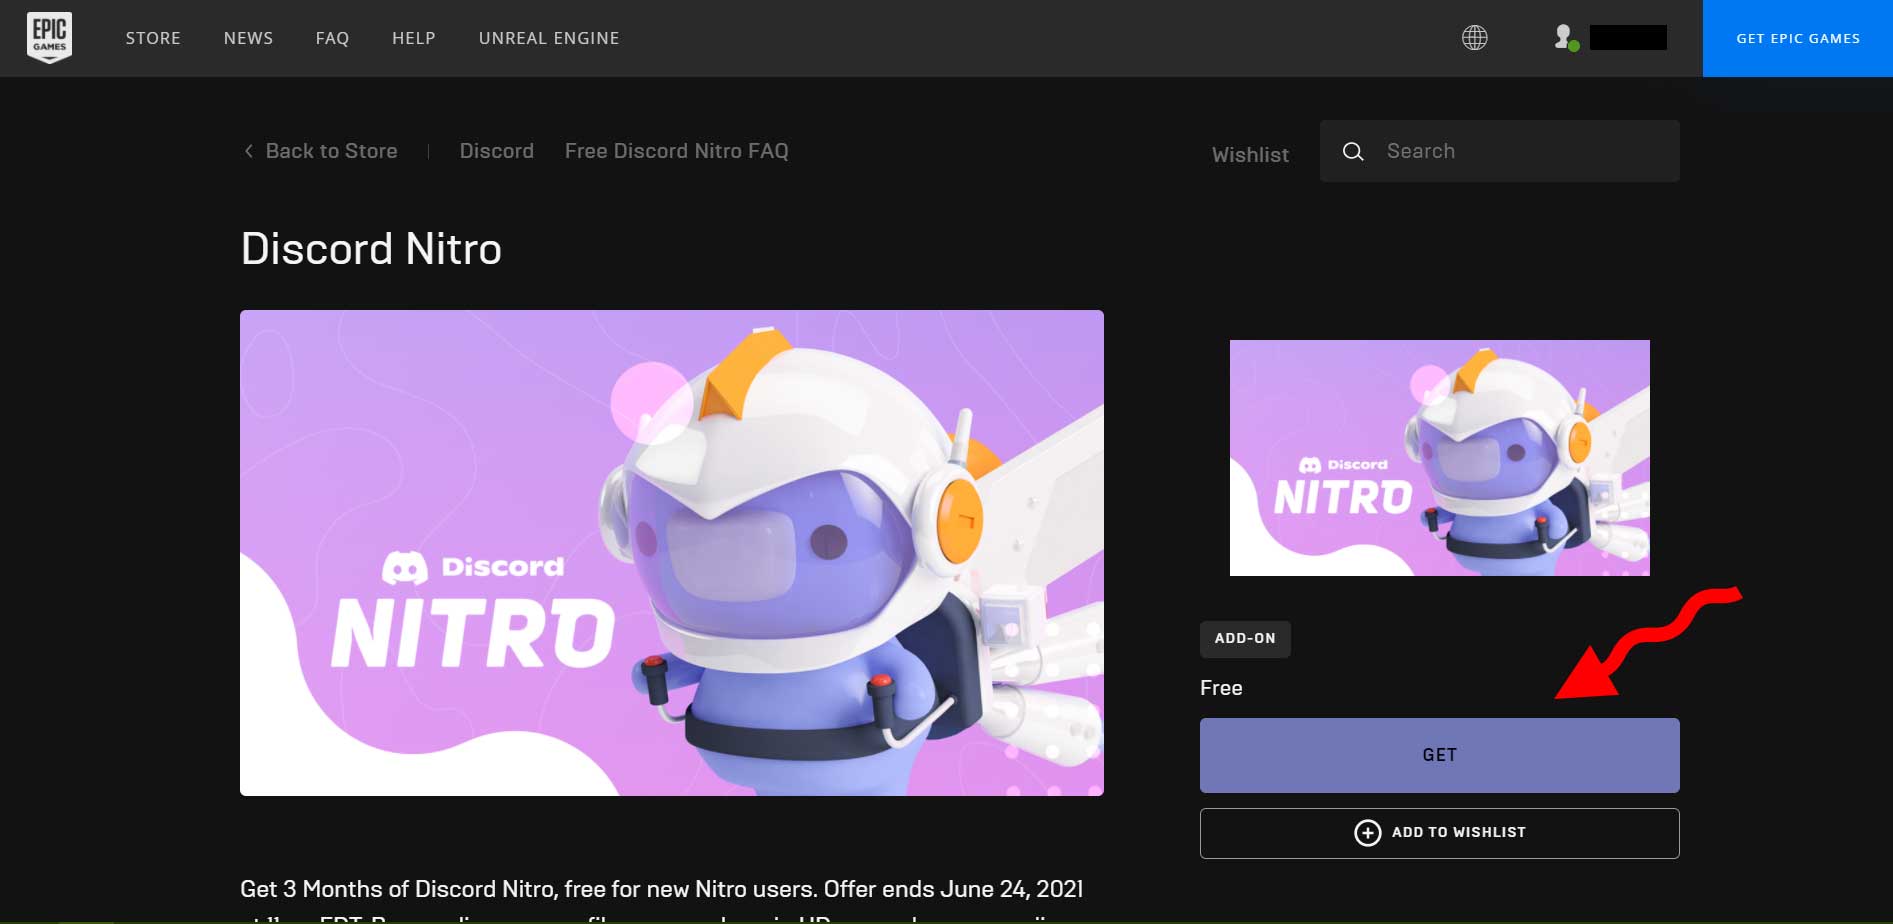 How to Get Discord Nitro for free on Epic Games Store